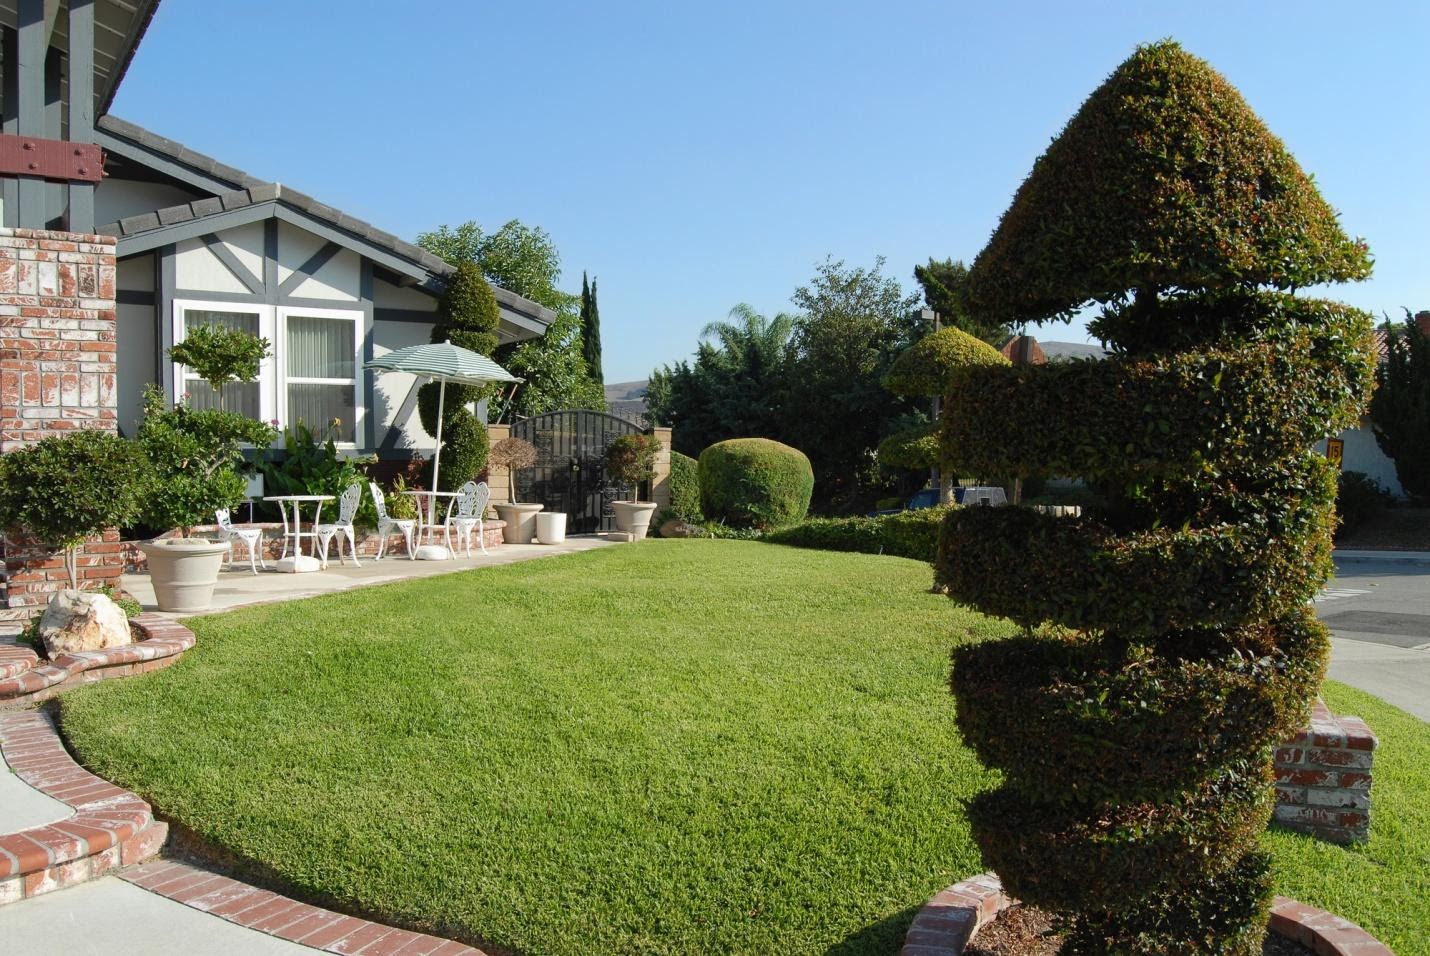 Transform Your Lawn for Less: Front Yard Landscaping Ideas on a Budget